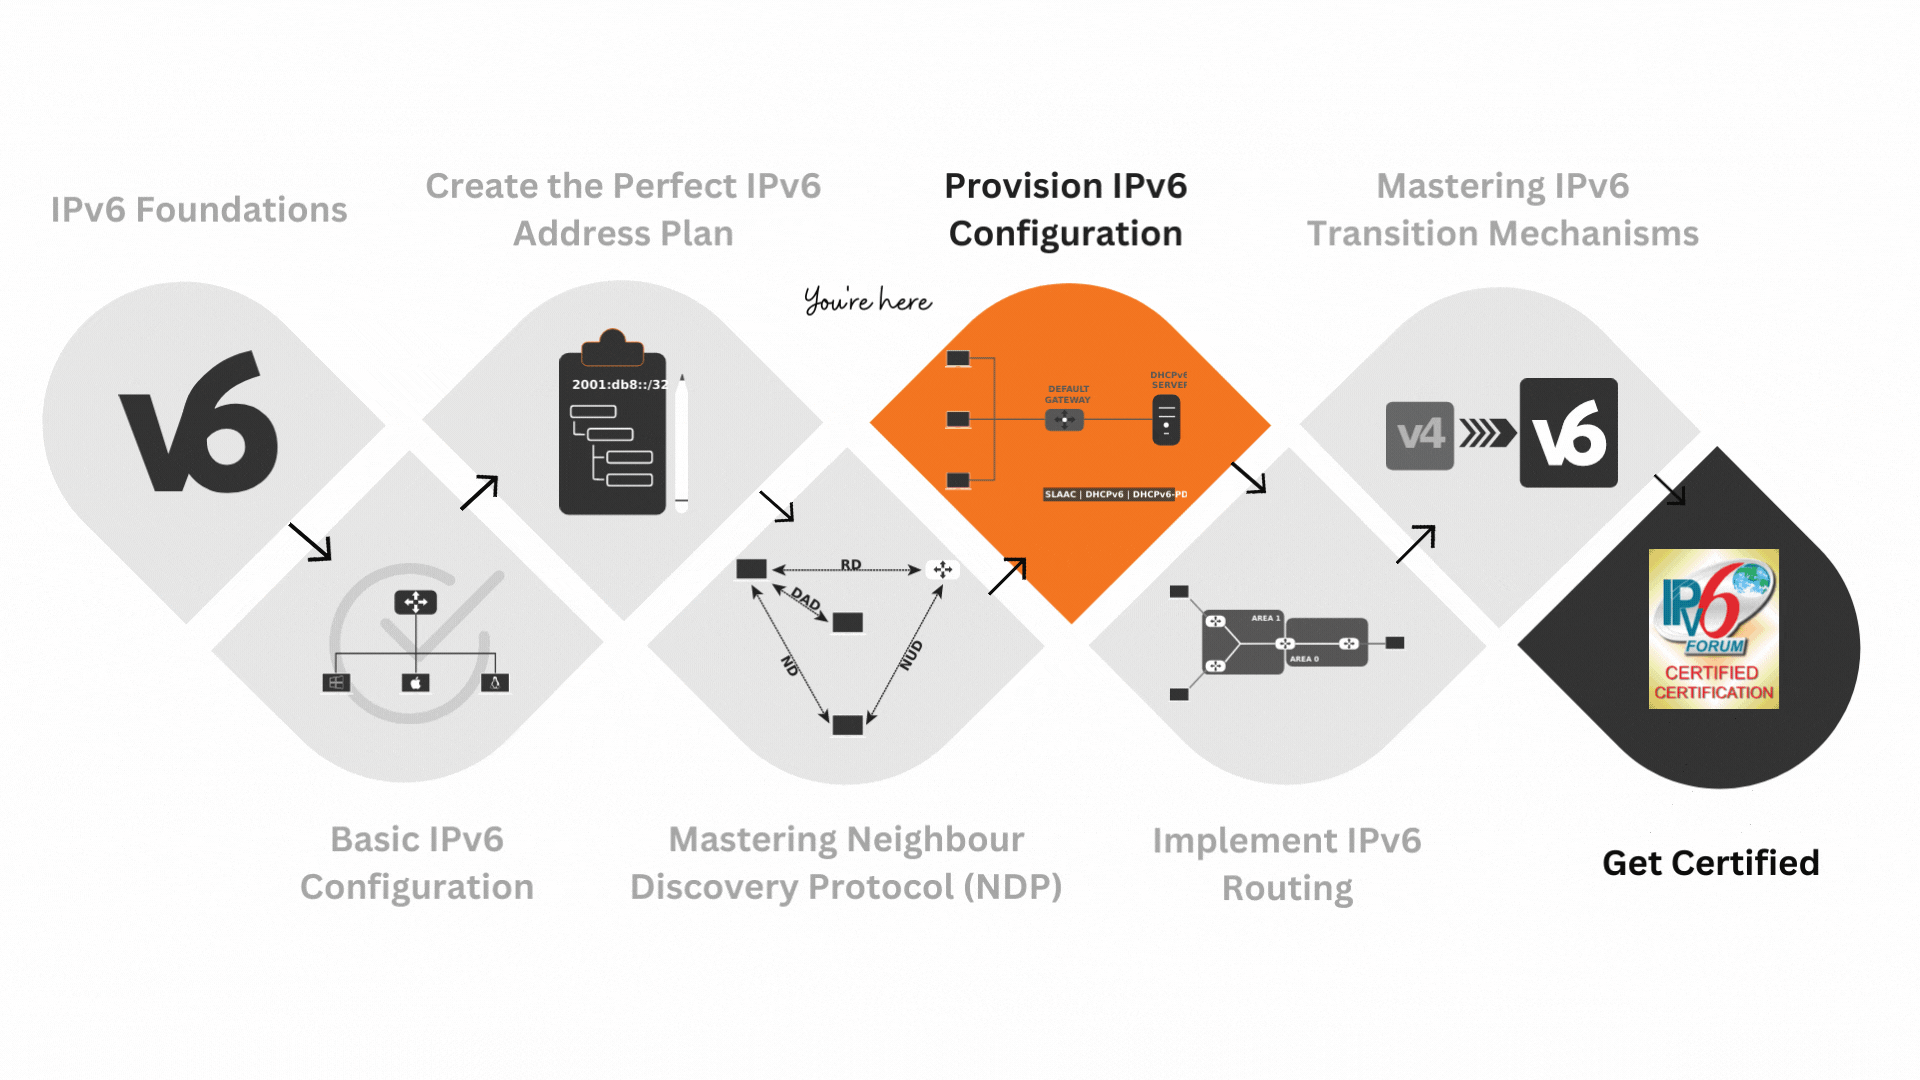 provision IPv6 learning path